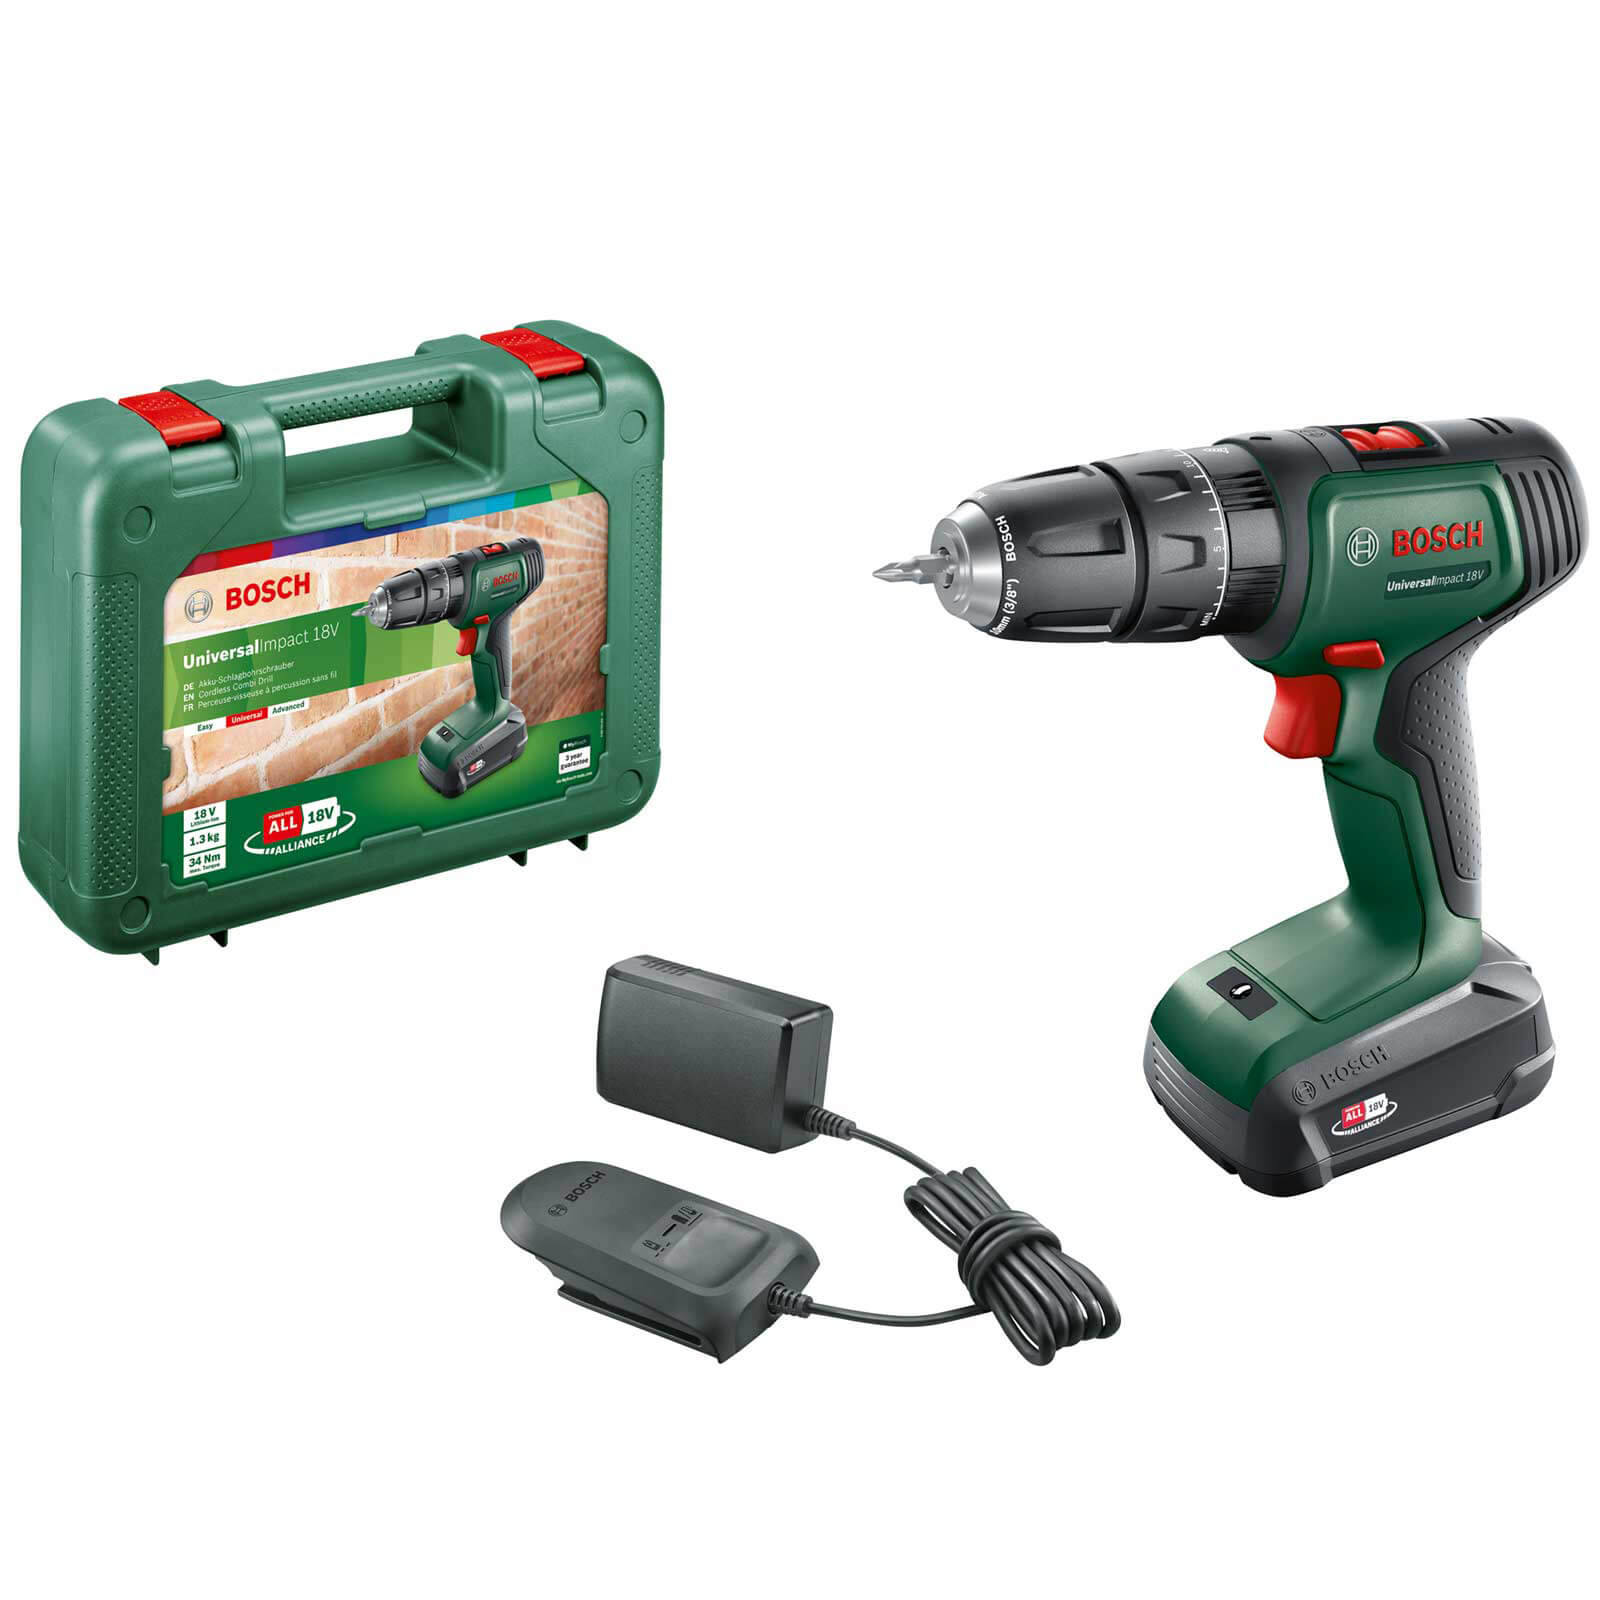 Image of Bosch UNIVERSALIMPACT 18v Cordless Combi Drill 1 x 1.5ah Li-ion Charger Case